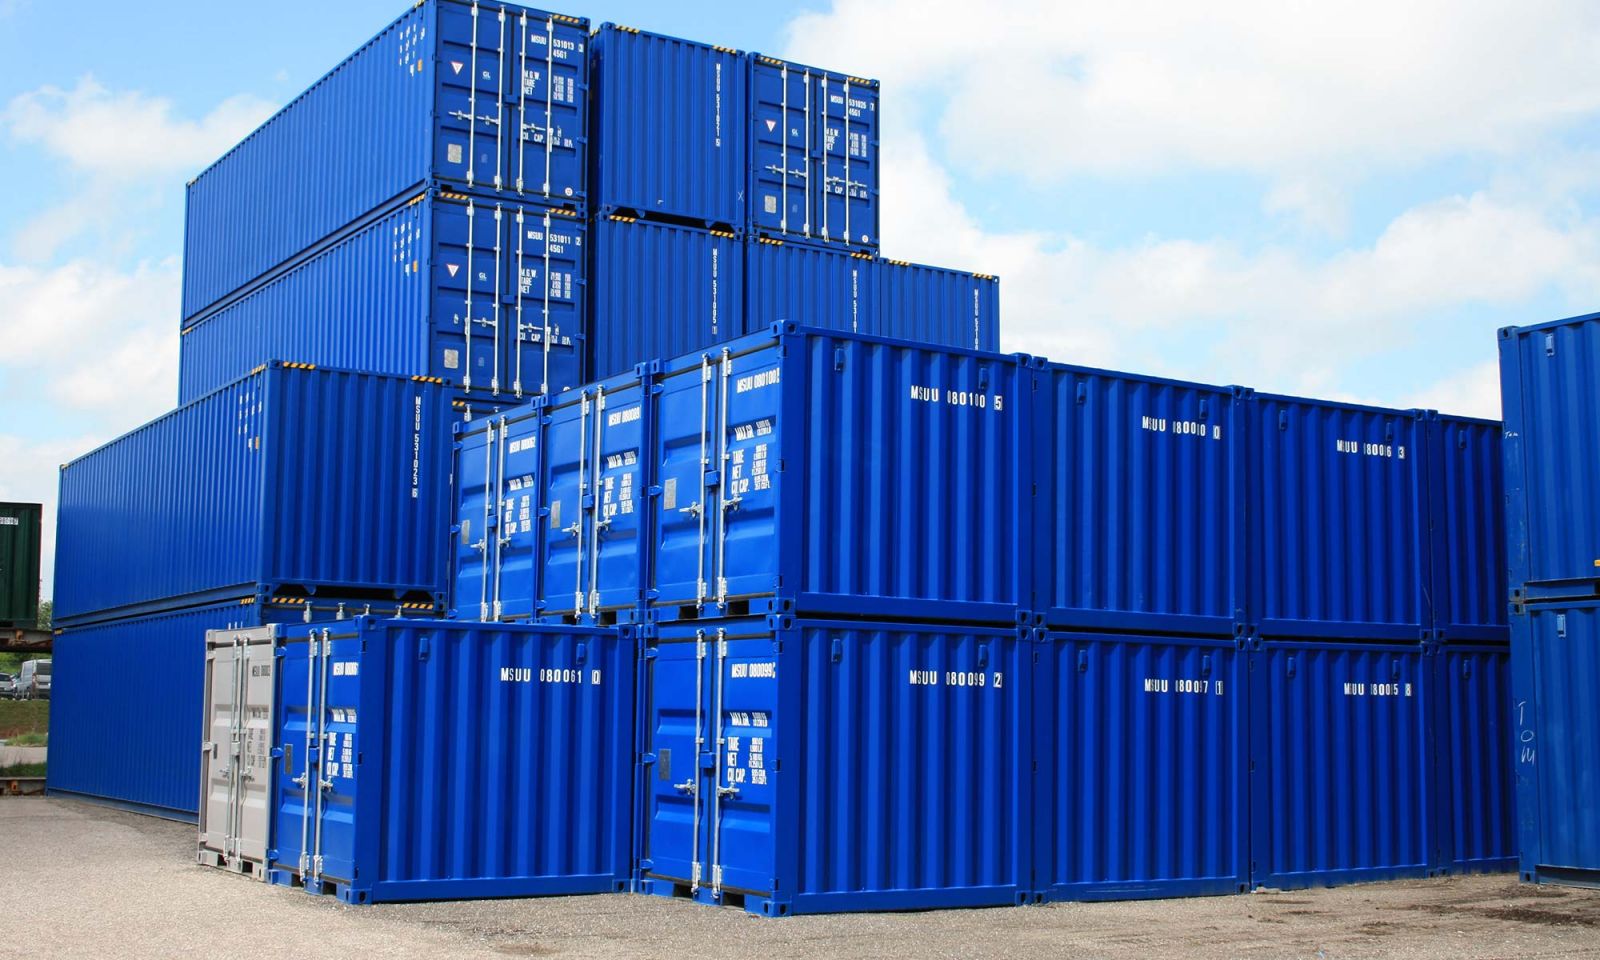 thue container tai thanh pho ho chi minh - ảnh 3